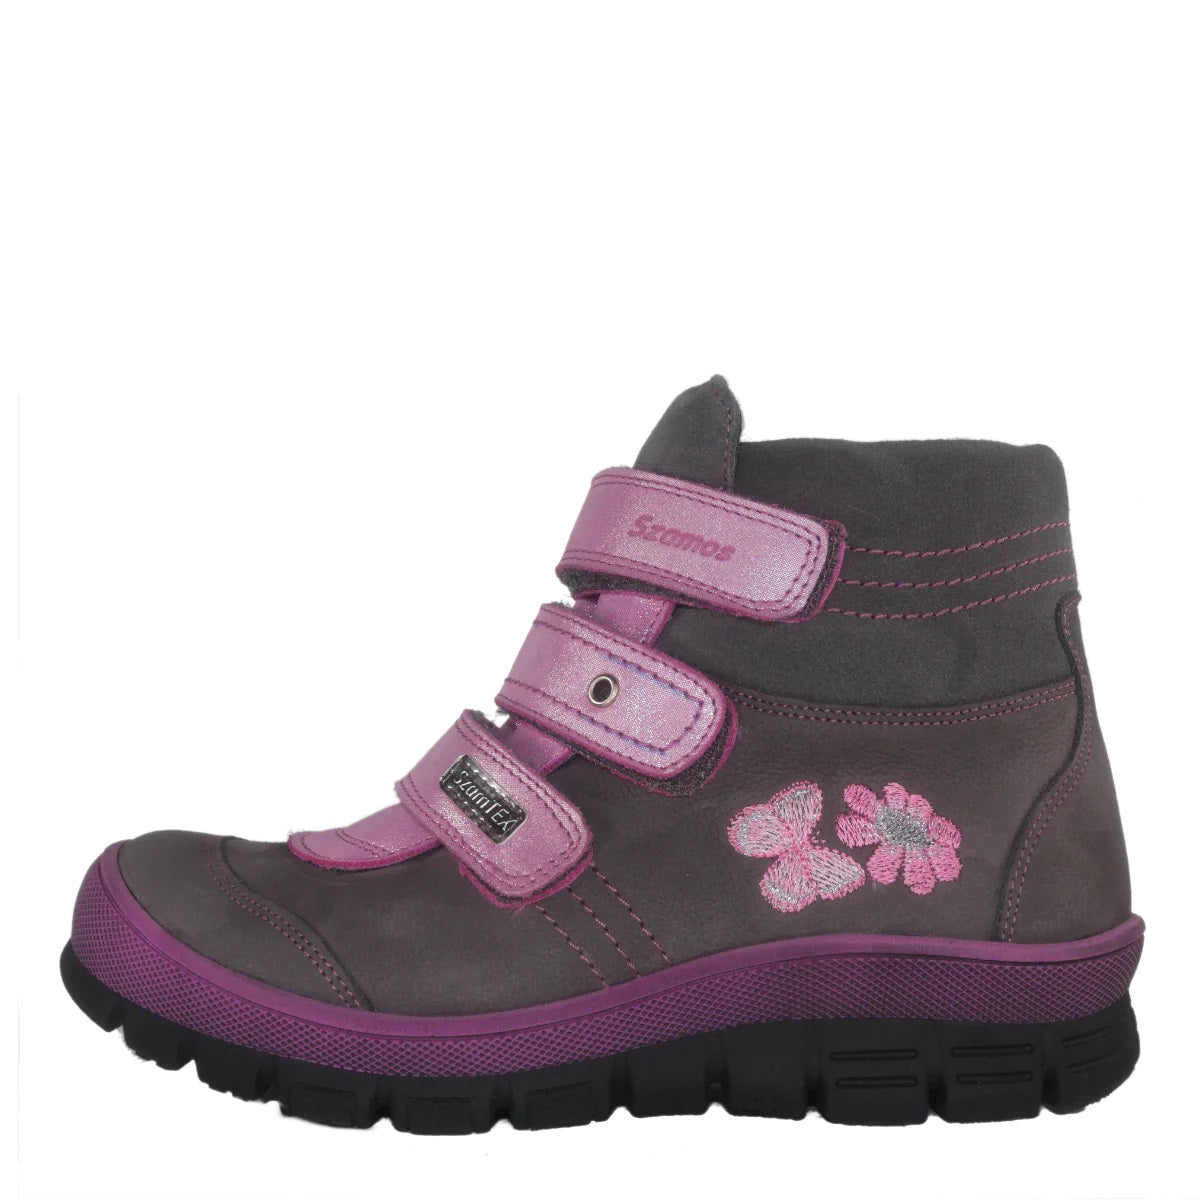 Szamos kid girl winter boots grey with pink velcro straps and flower butterfly pattern big kid size